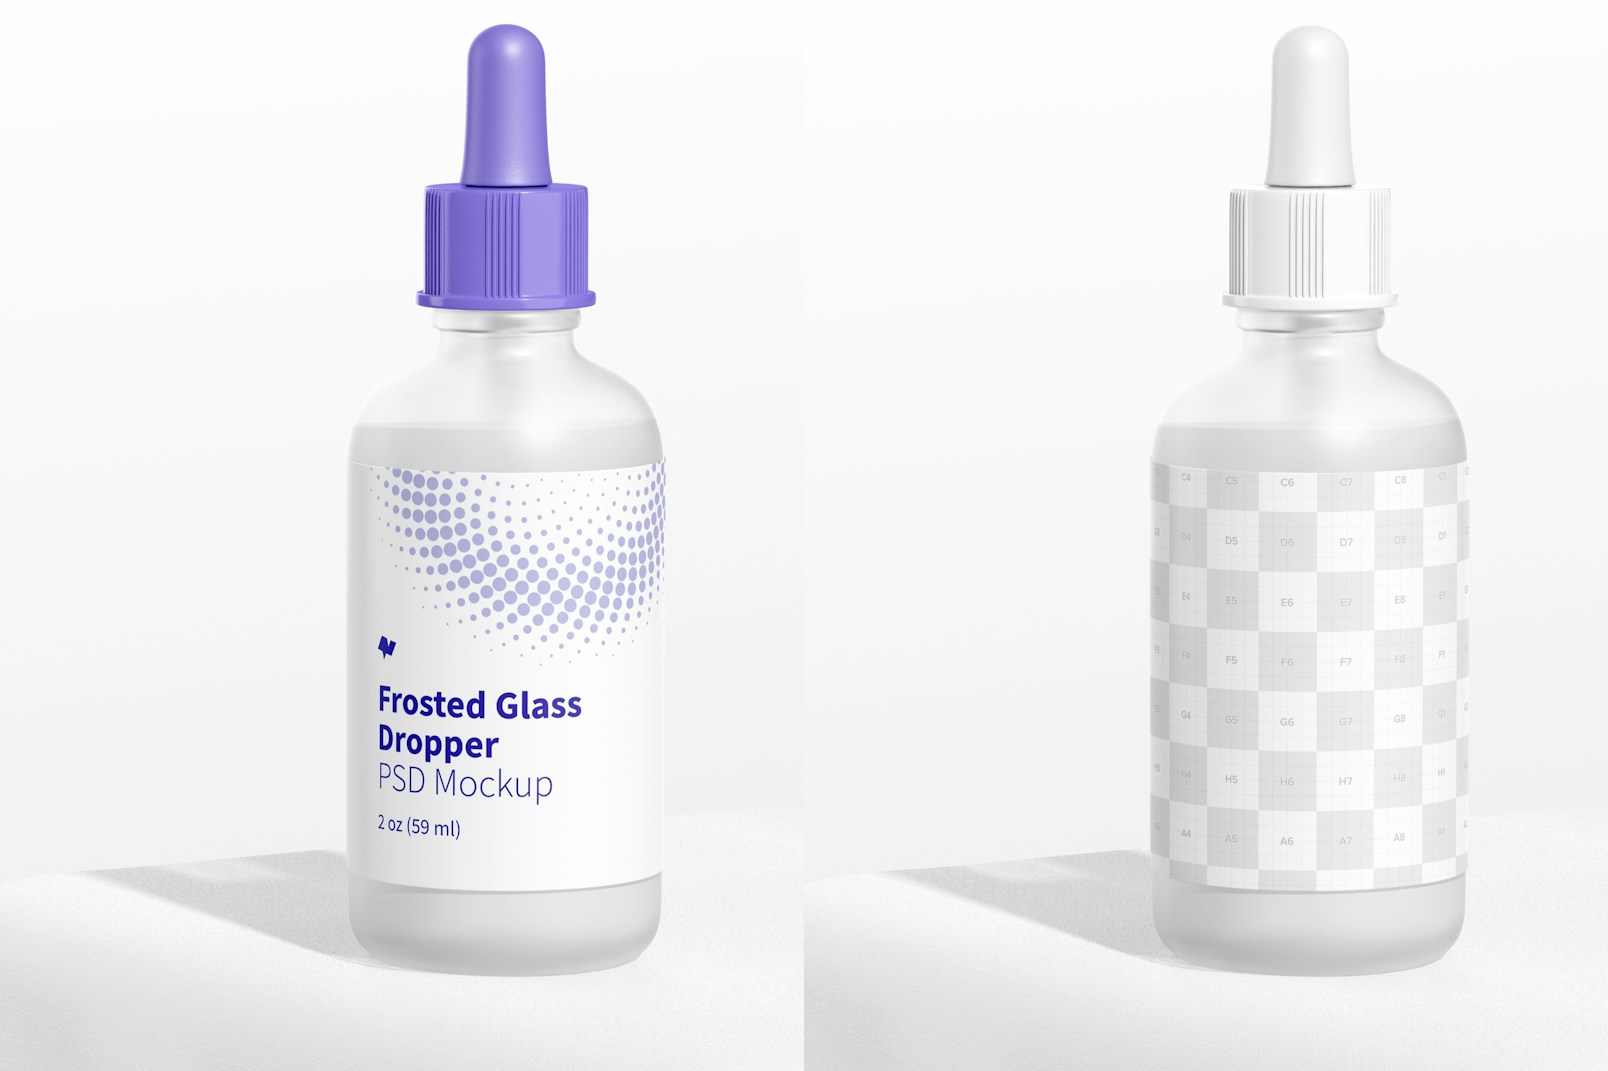 2 oz Frosted Glass Dropper Mockup